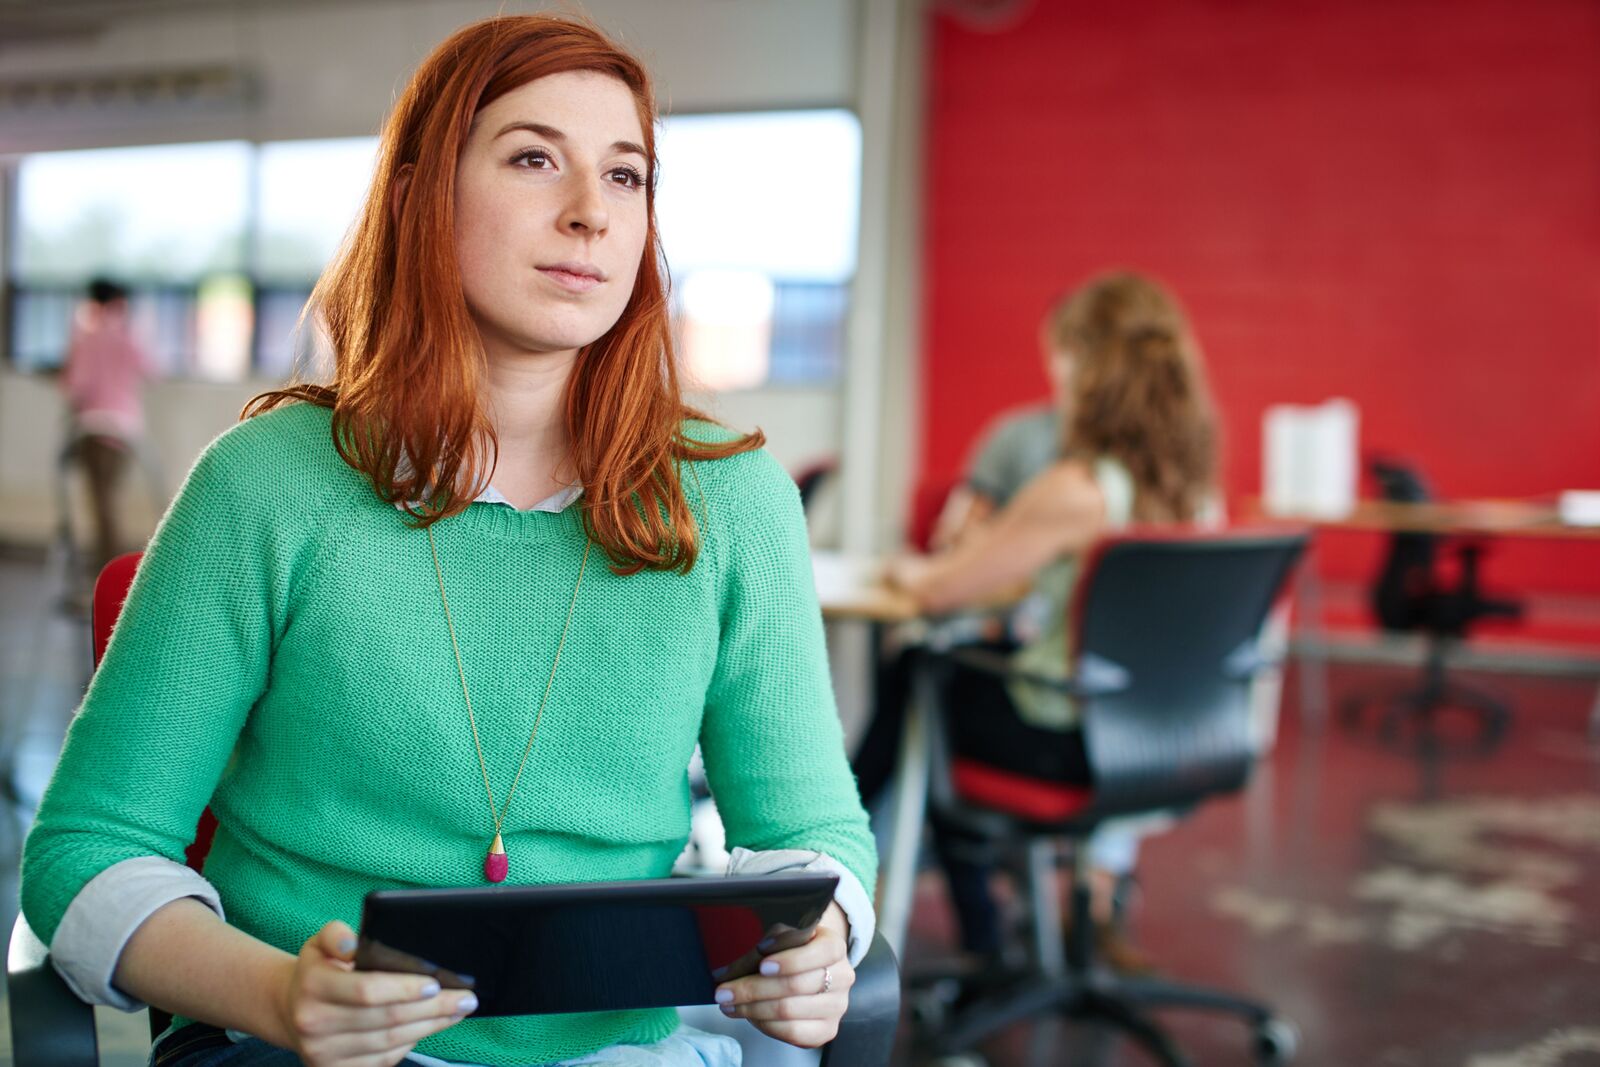 Woman with red hair and a green jumper holding a tablet computer in a workspace.